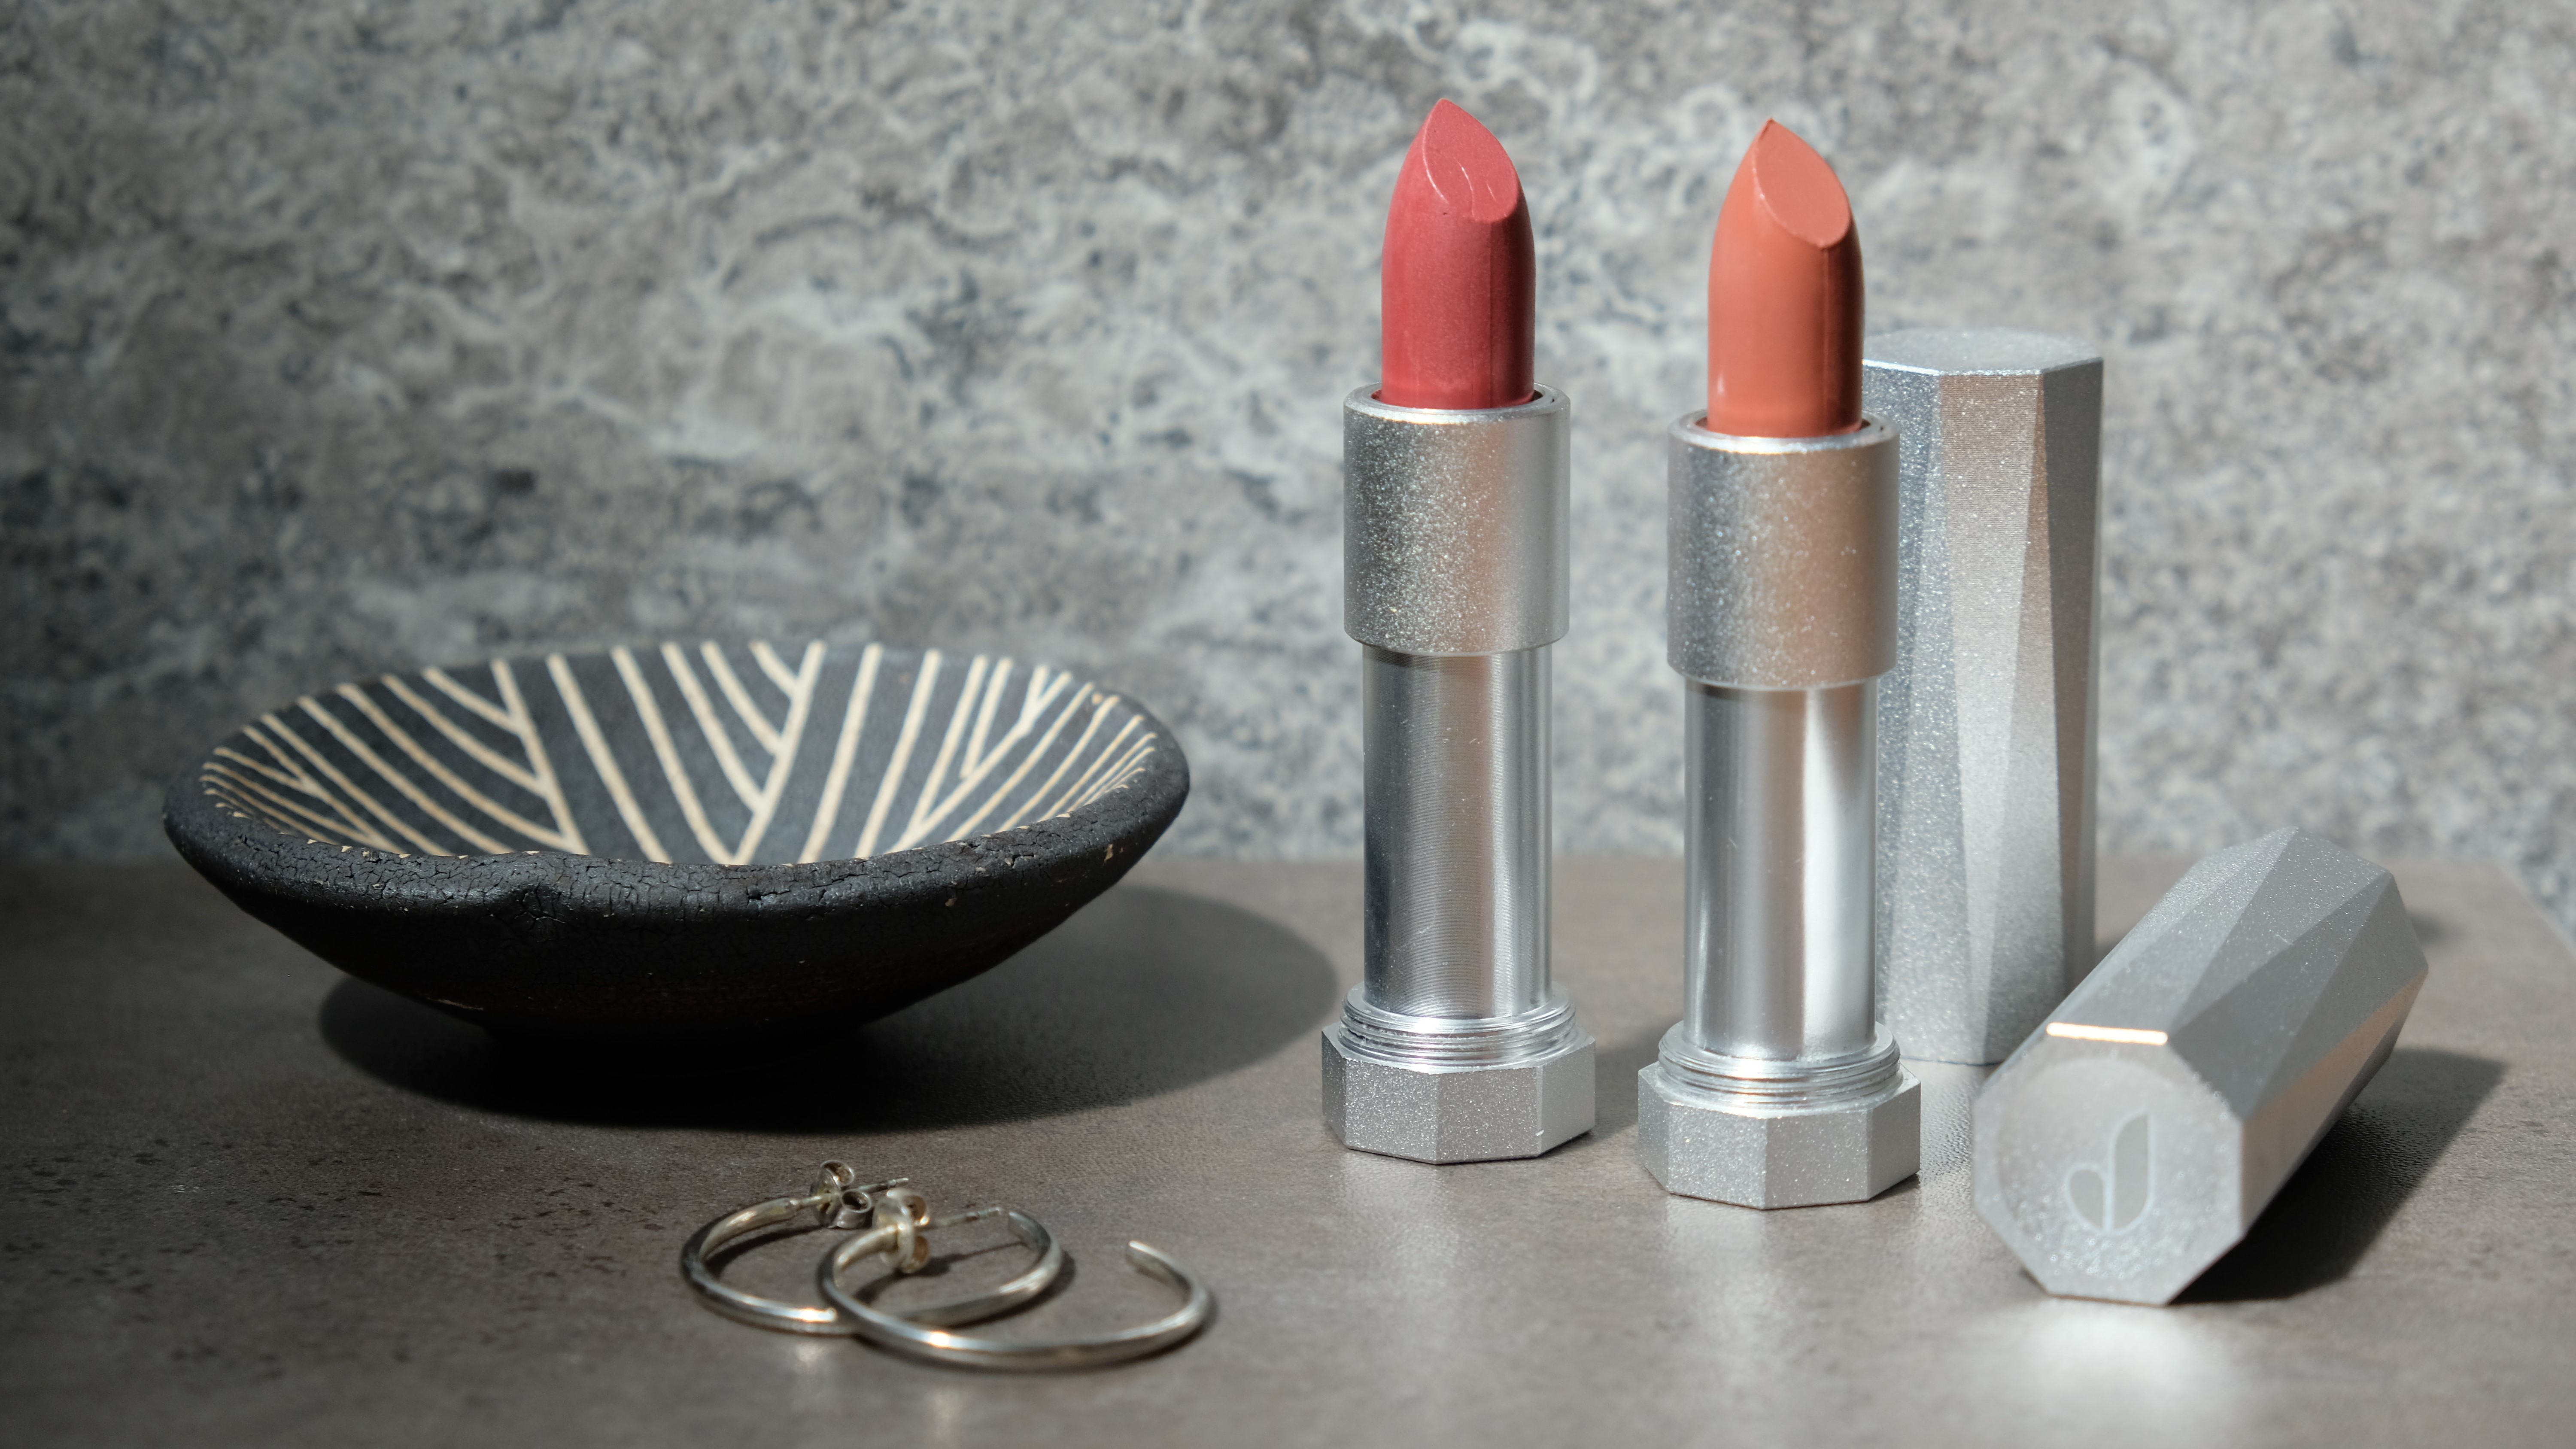 Two Juni lipsticks in pink and nude against a marbled background with a bowl and earrings 